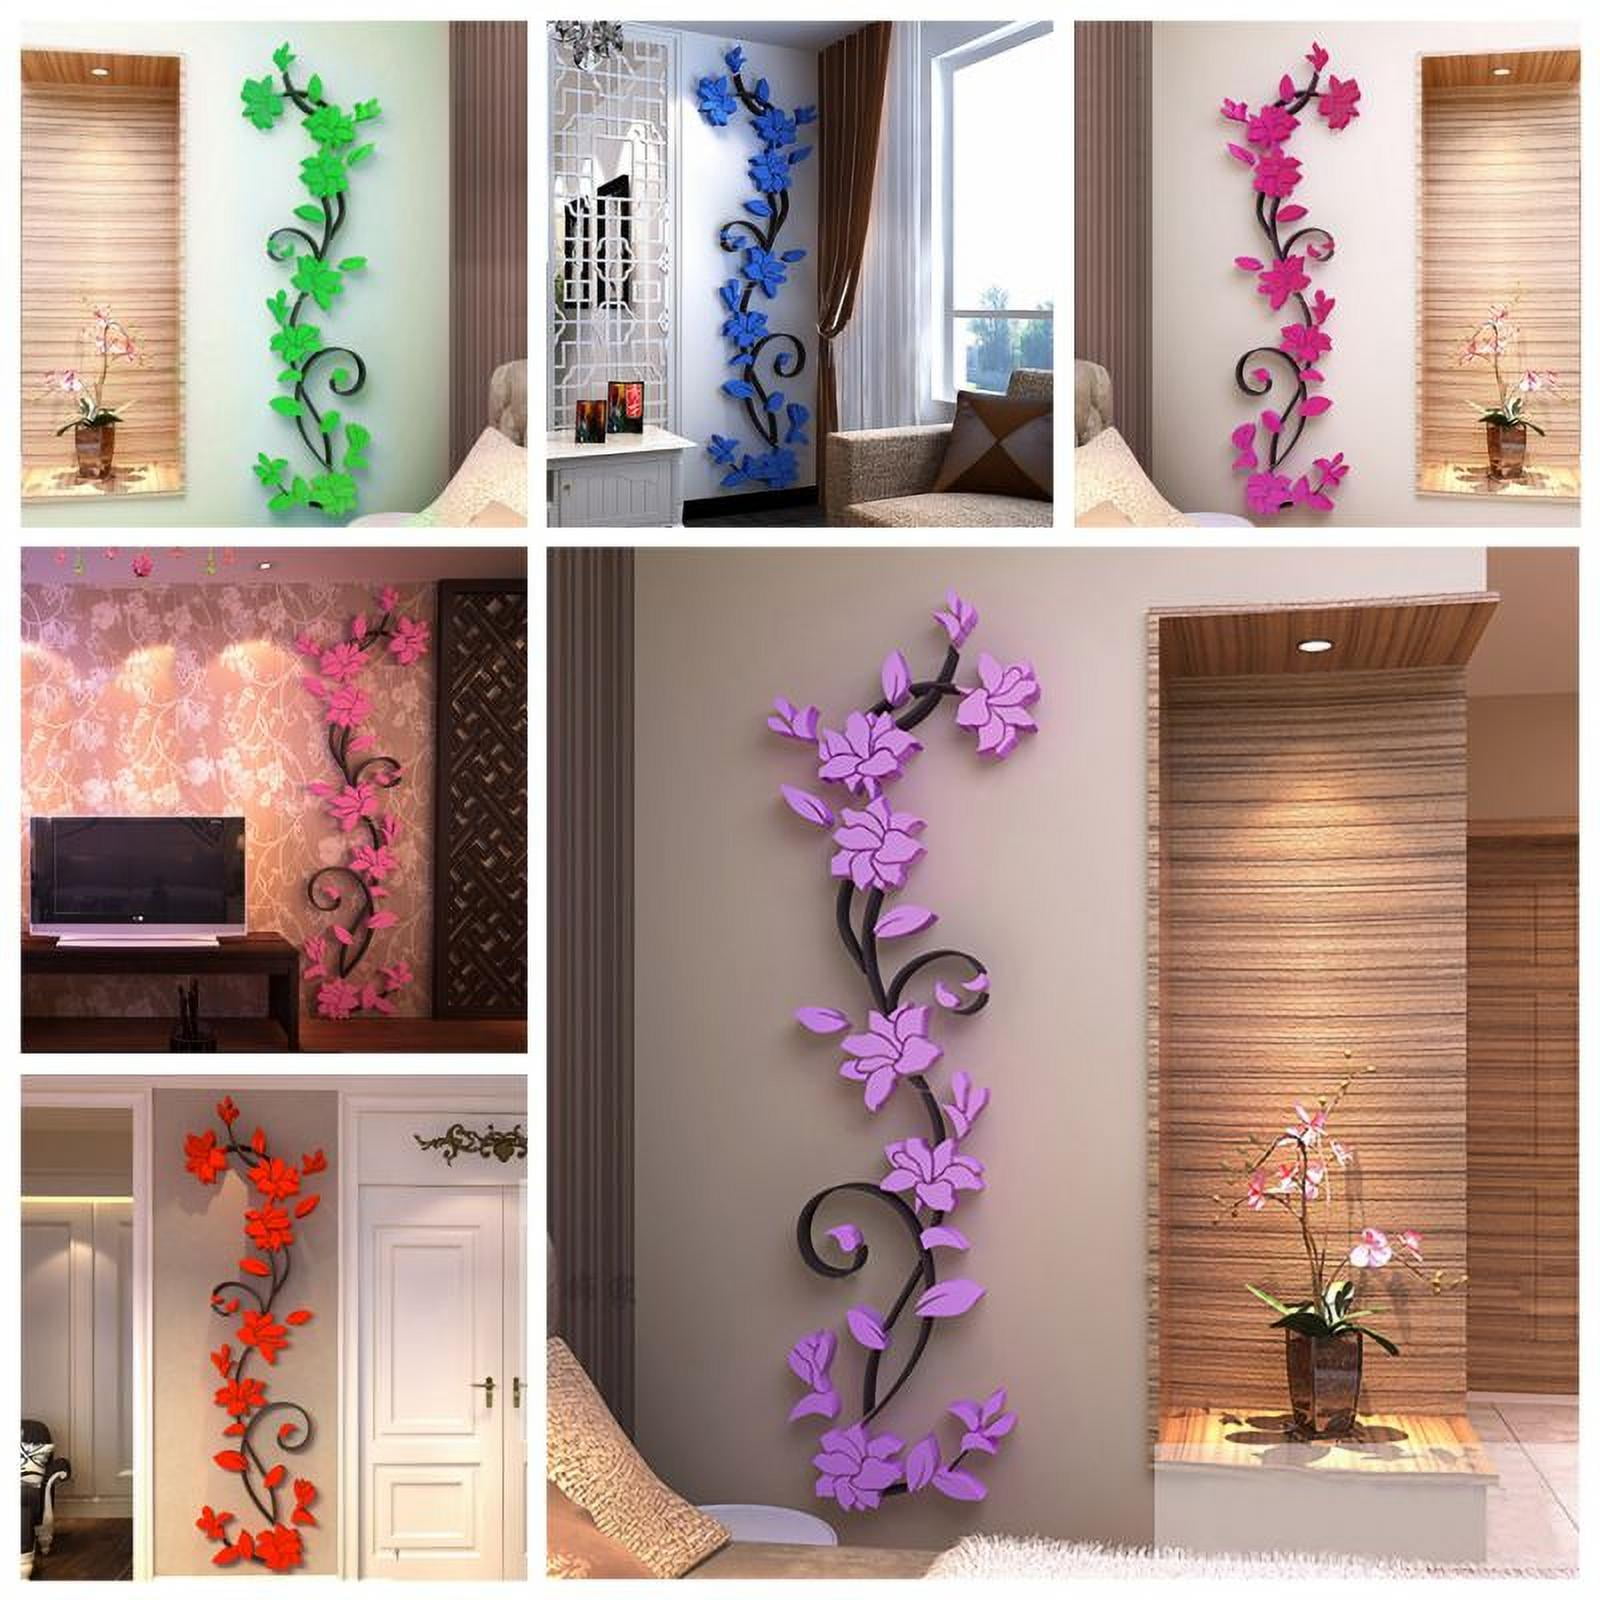 3D Simple Mirror Wall Stickers Acrylic Mural Flower Clock Bedroom Decor